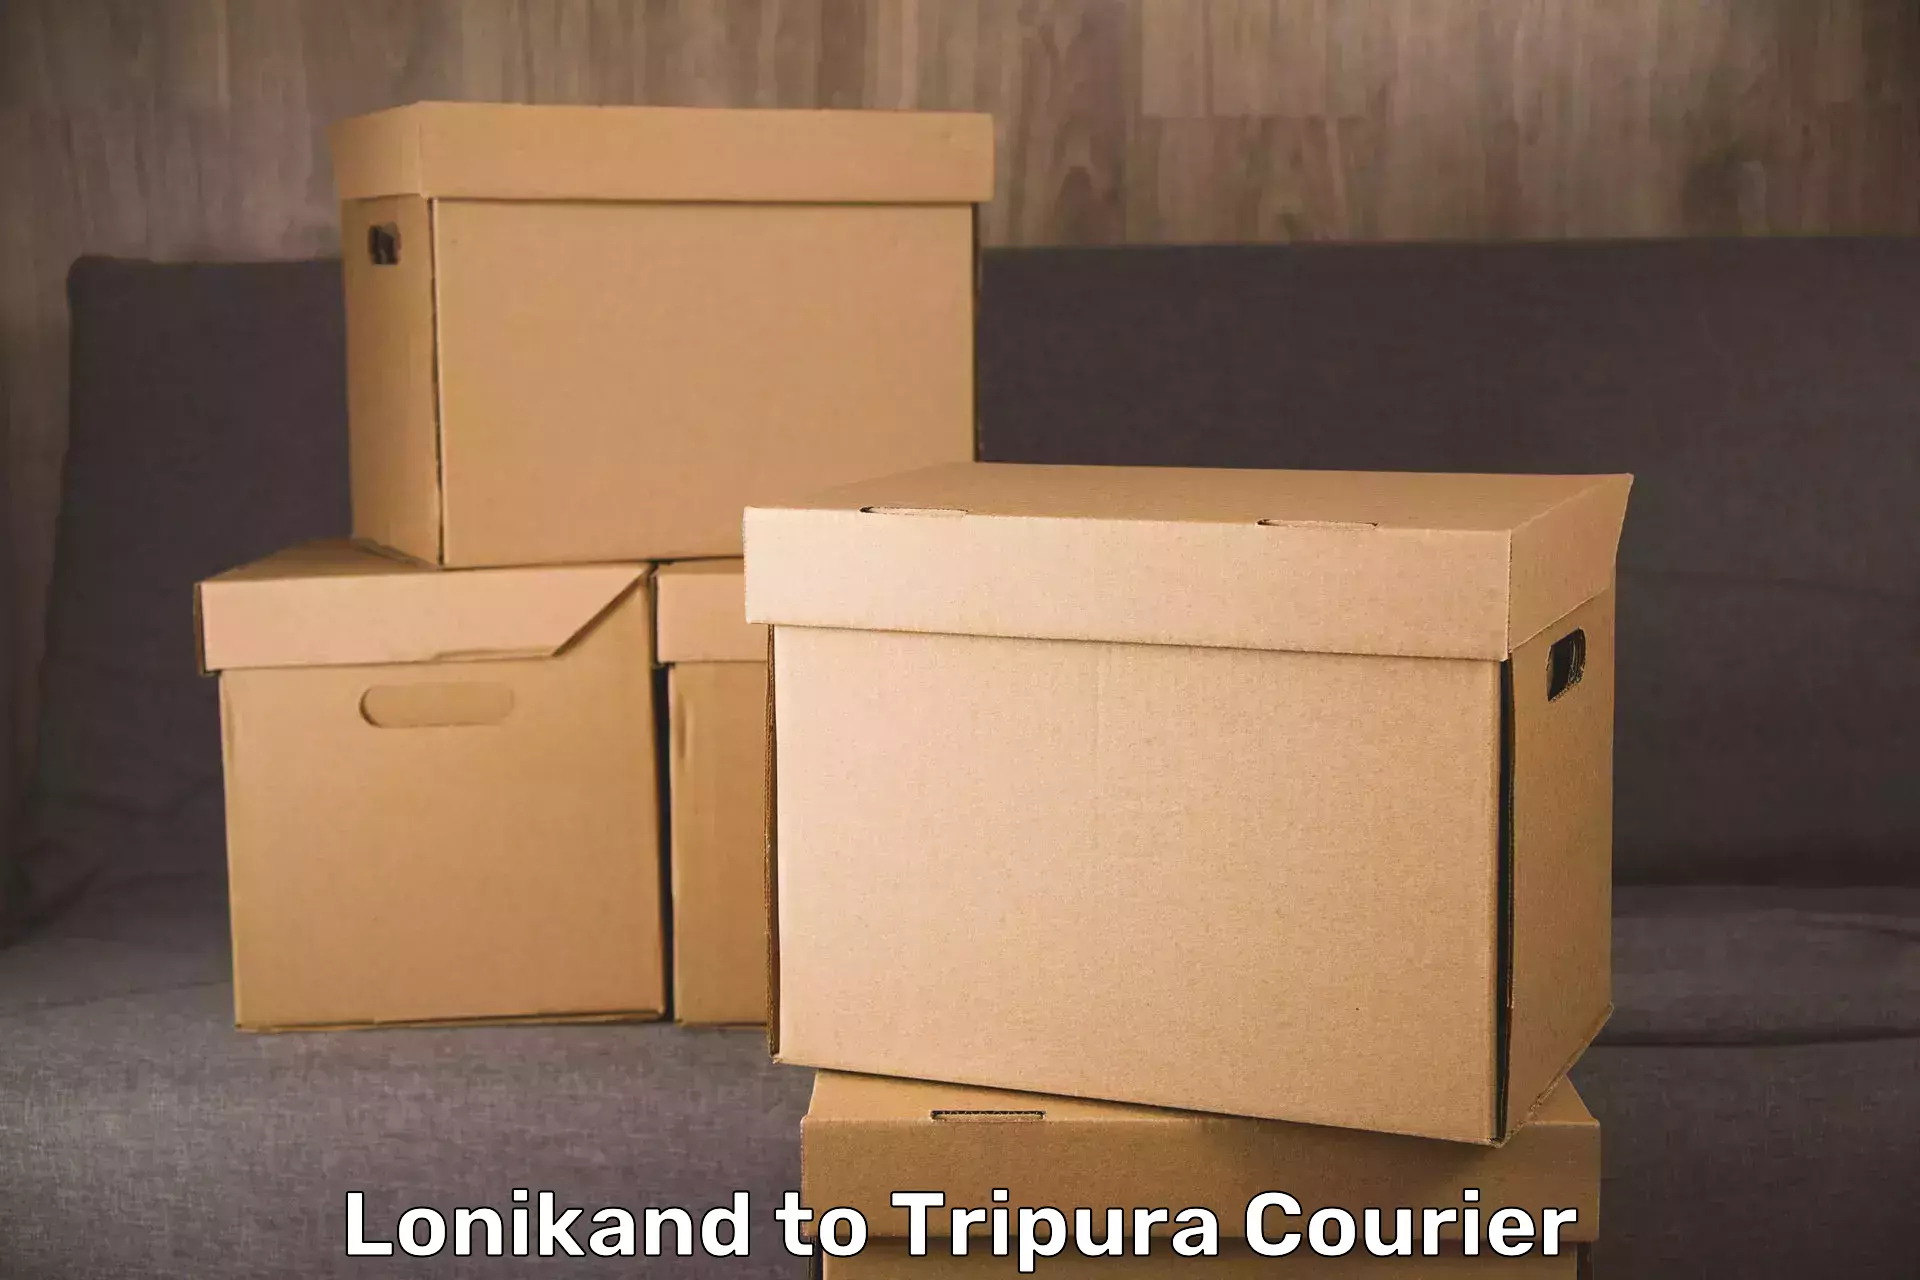 Luggage delivery network Lonikand to Udaipur Tripura